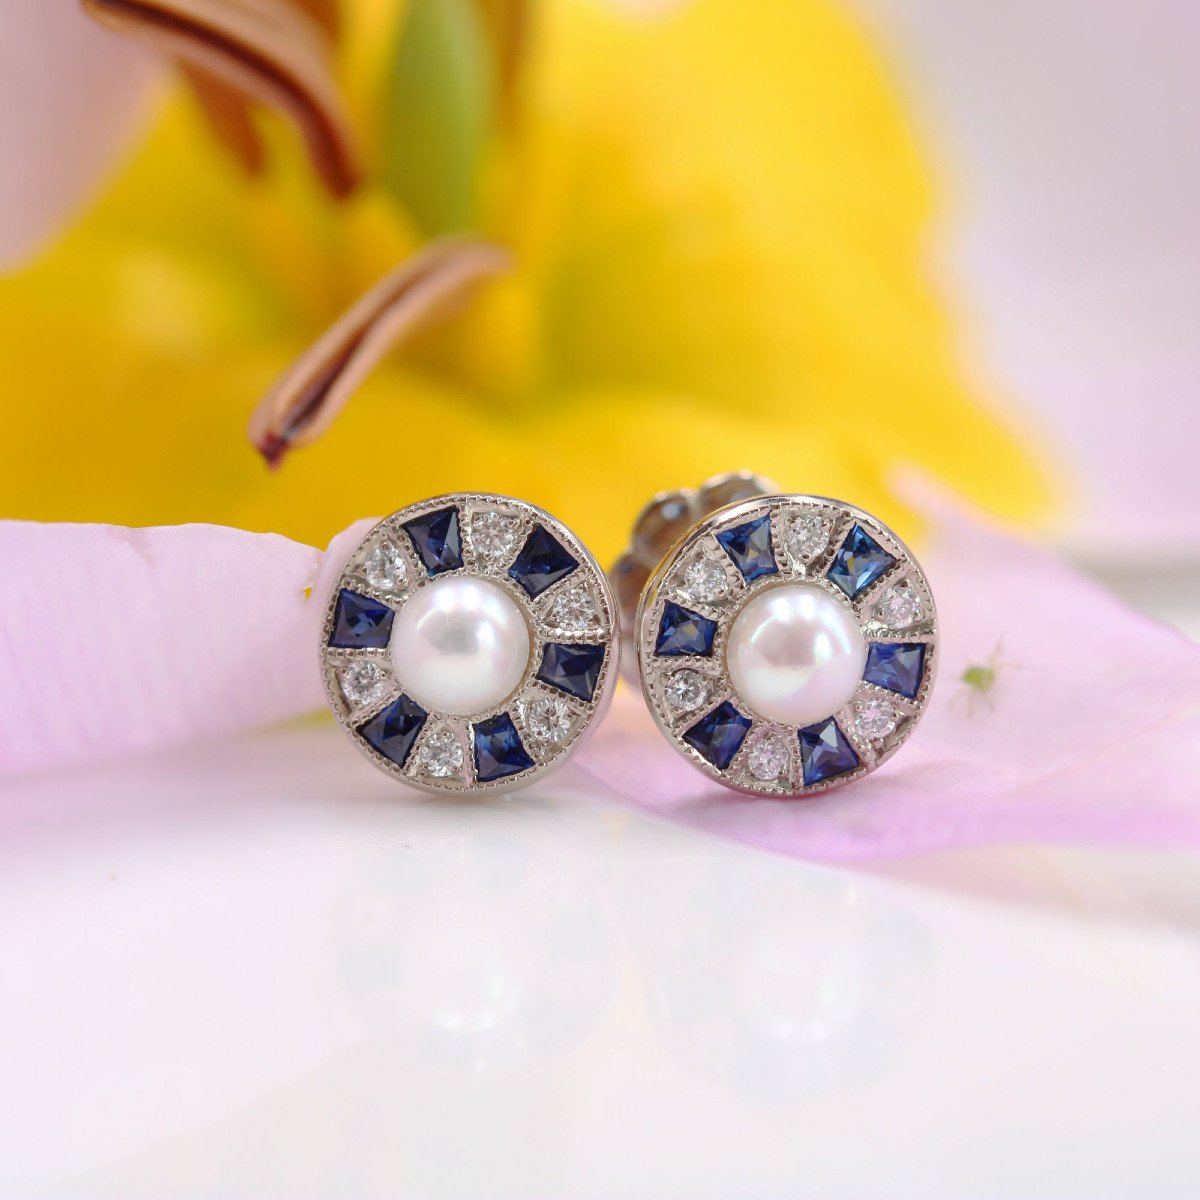 Calibrated Diamond And Sapphire Pearl Earrings-photo-3